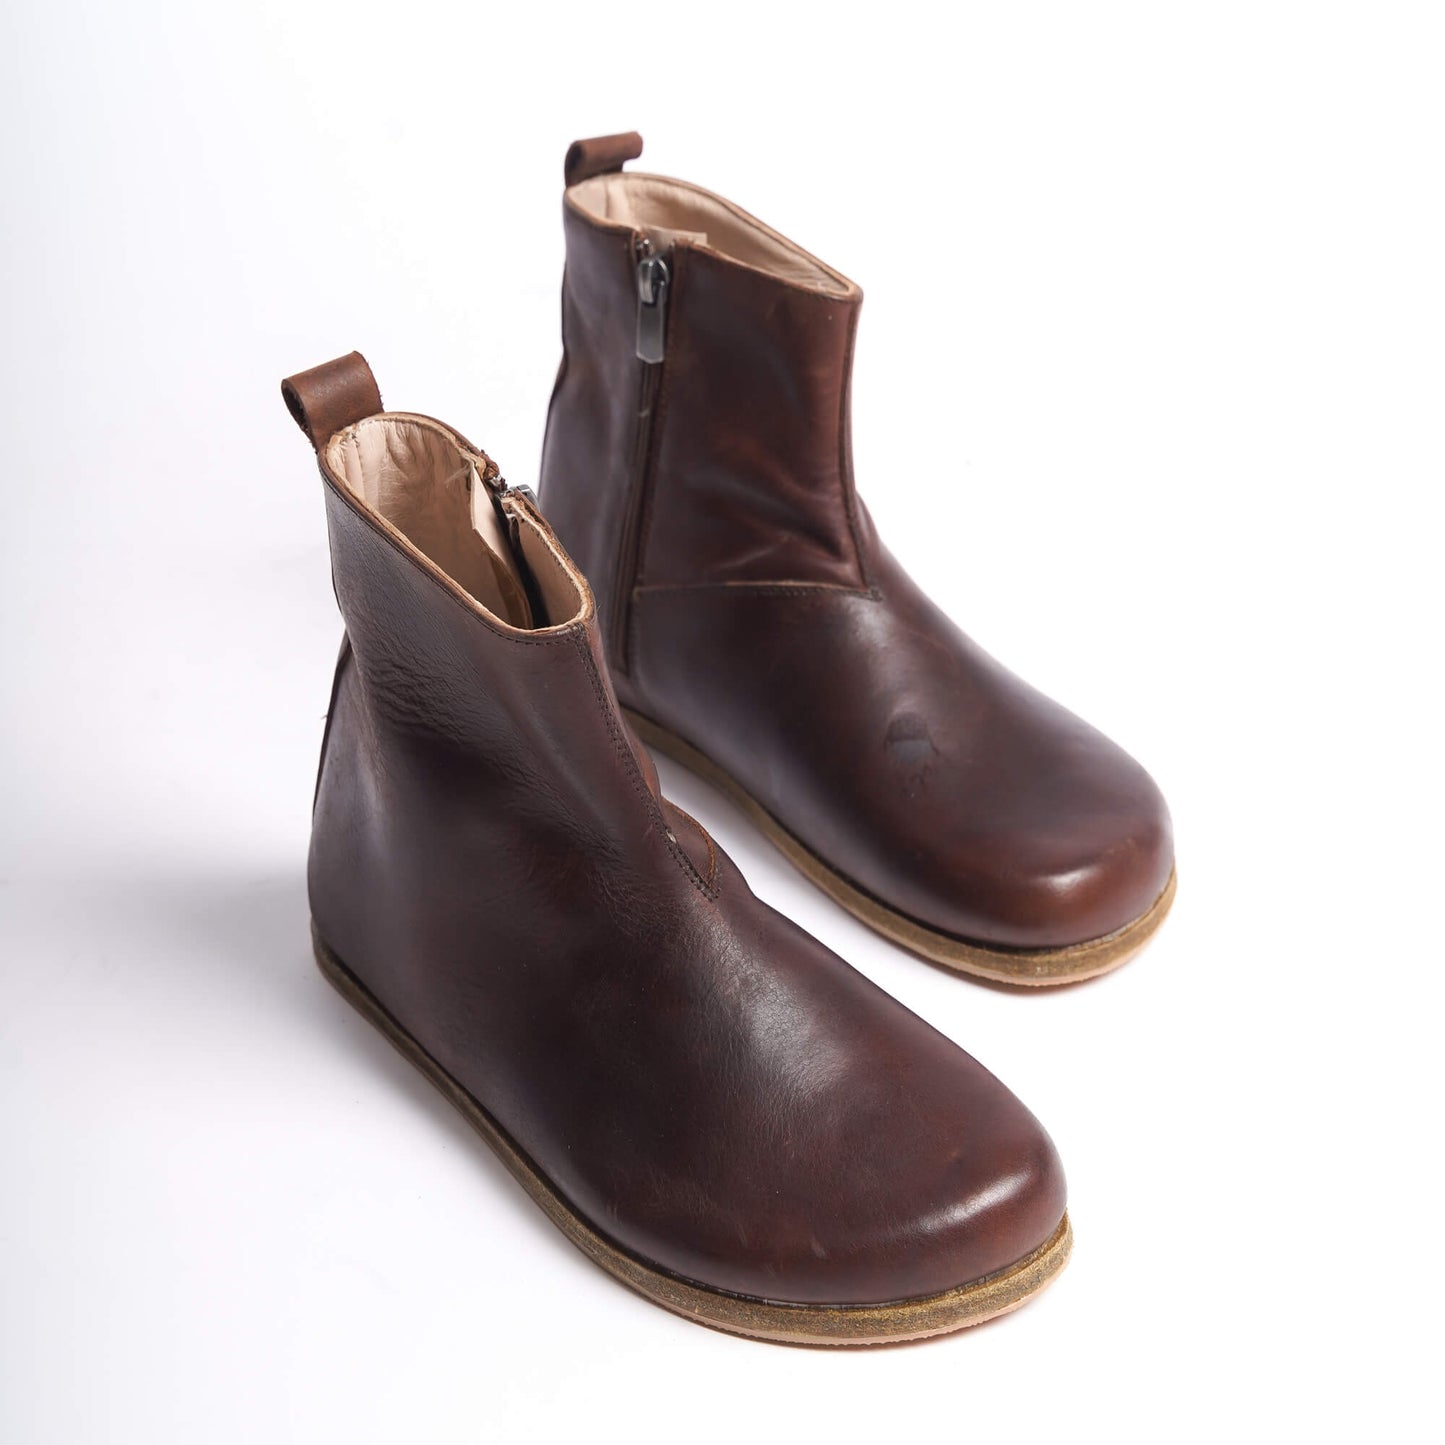 Elegant tan brown women's boots with a wide toe box and ergonomic soles. Ideal for a minimalist look and perfect for earthing enthusiasts seeking comfort and style.